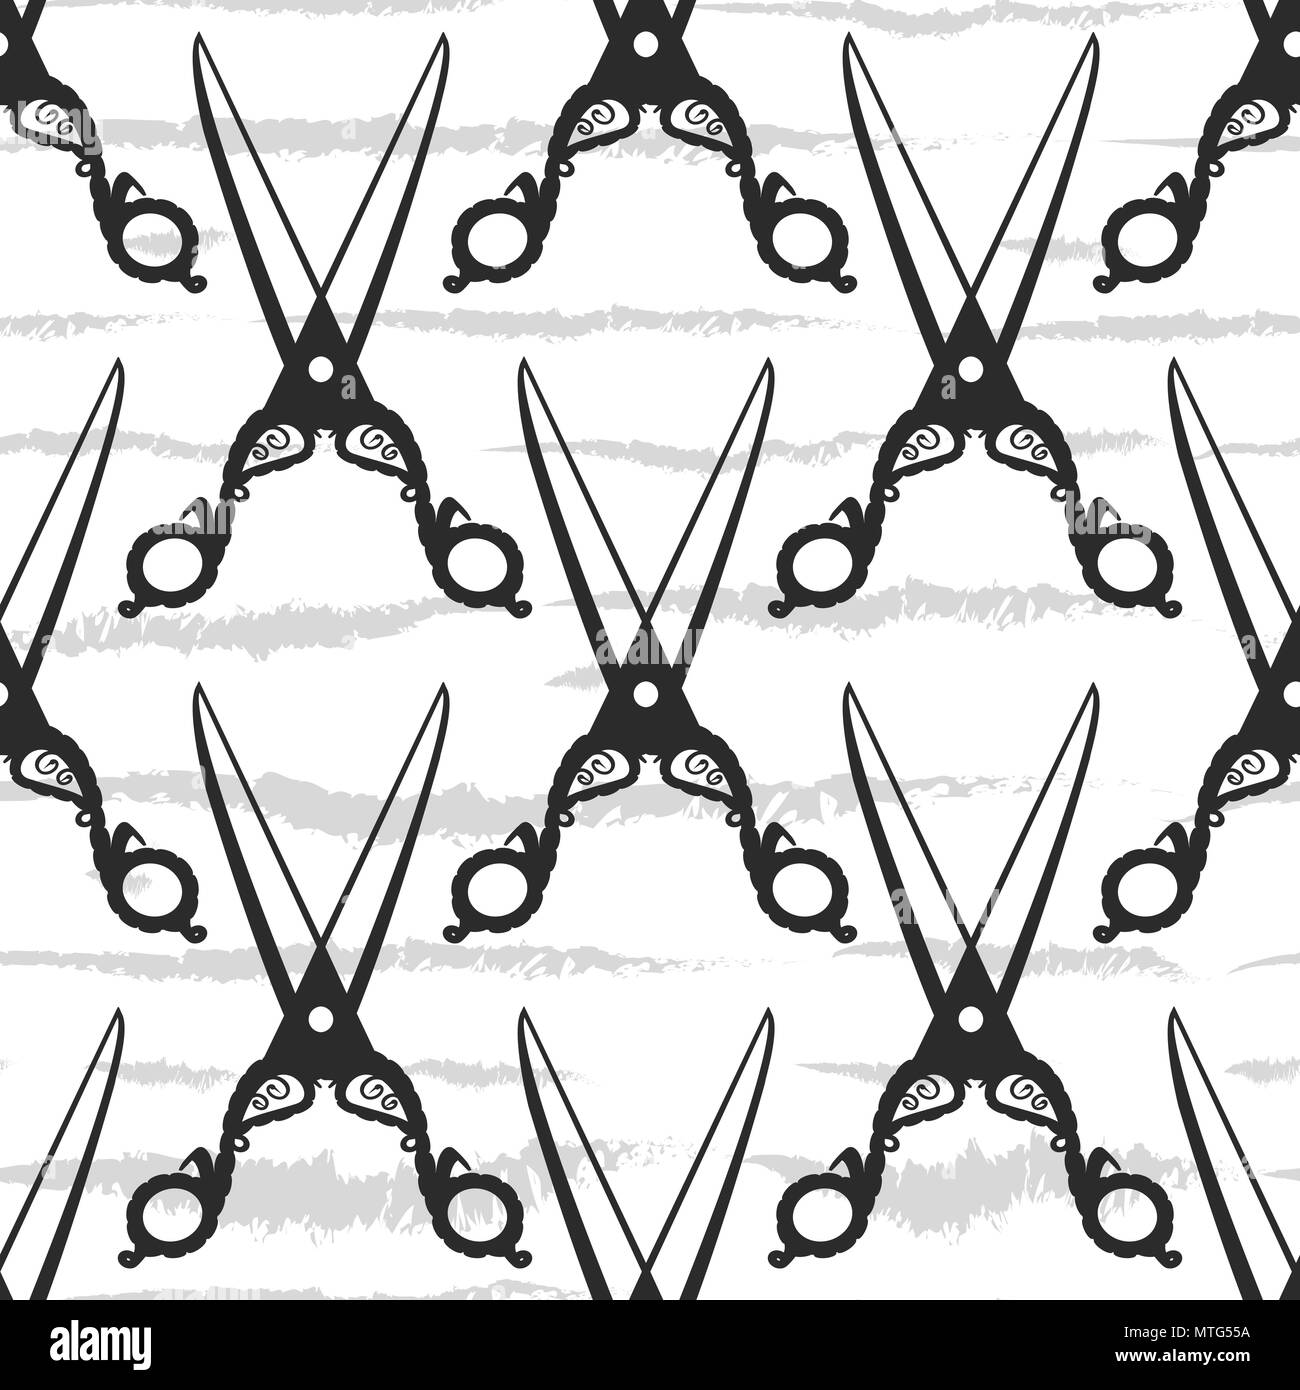 Scissors pattern seamless in simple style vector illustration ...